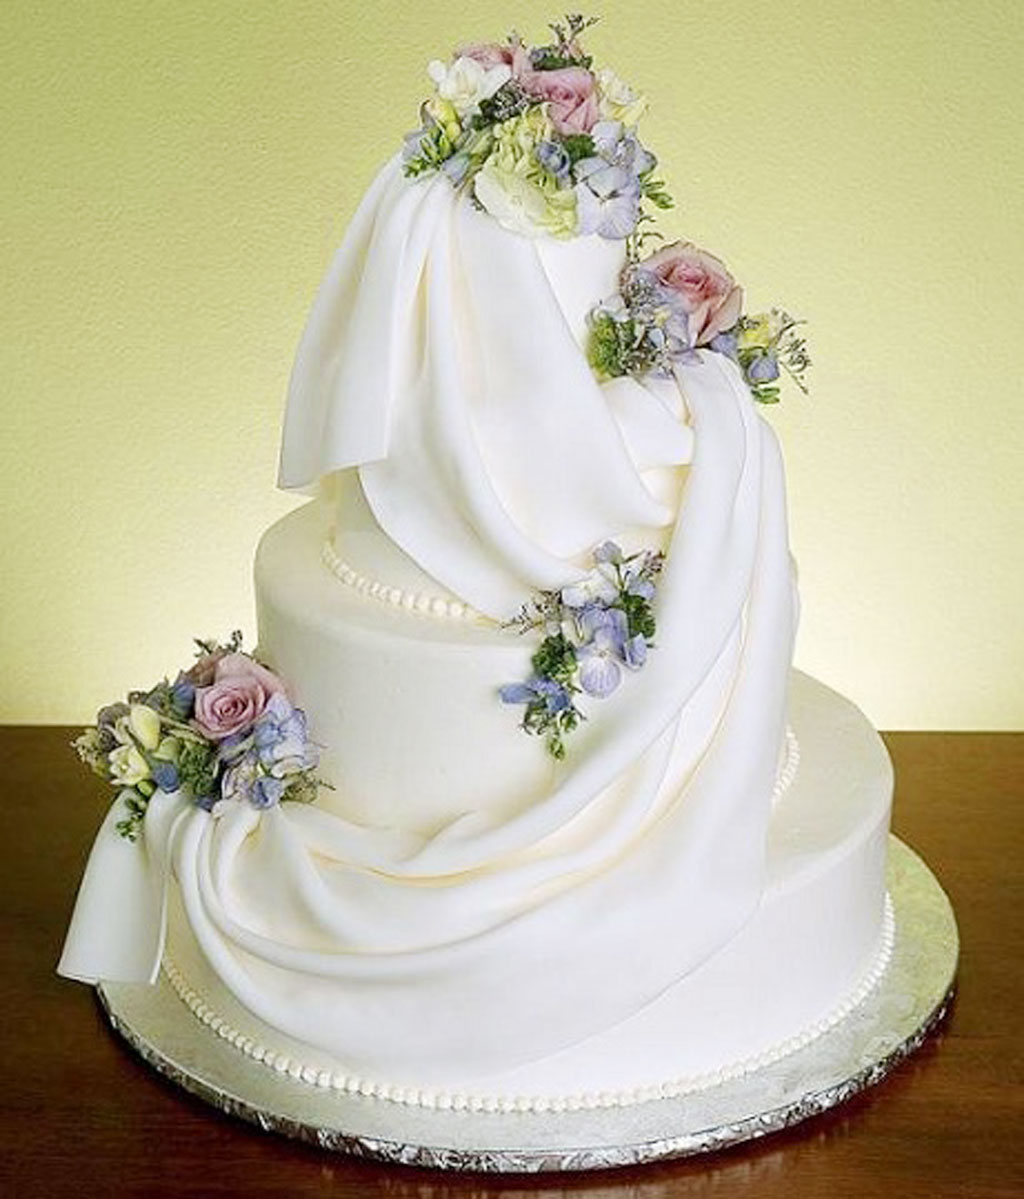 Most beautiful wedding cakes pictures